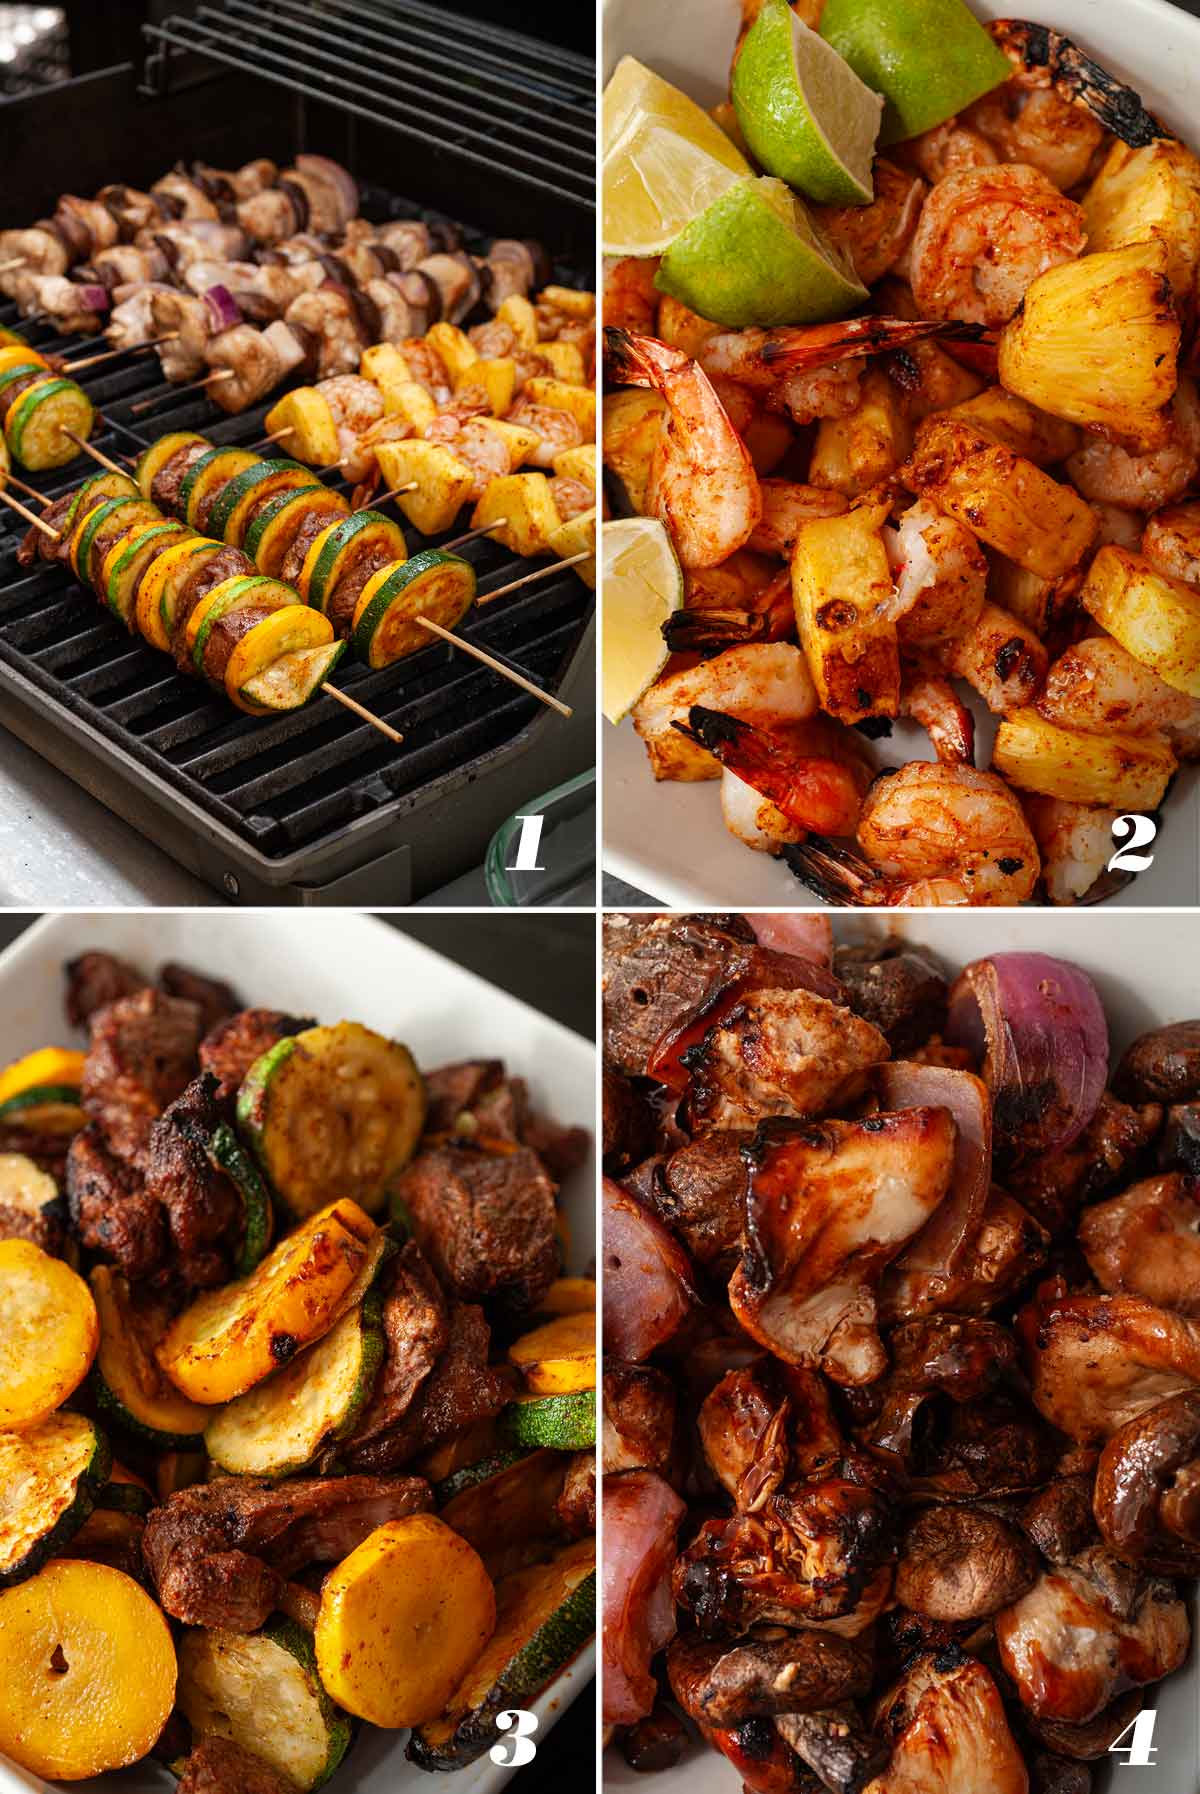 A collage of 4 numbered images showing how to grill and season skewers.